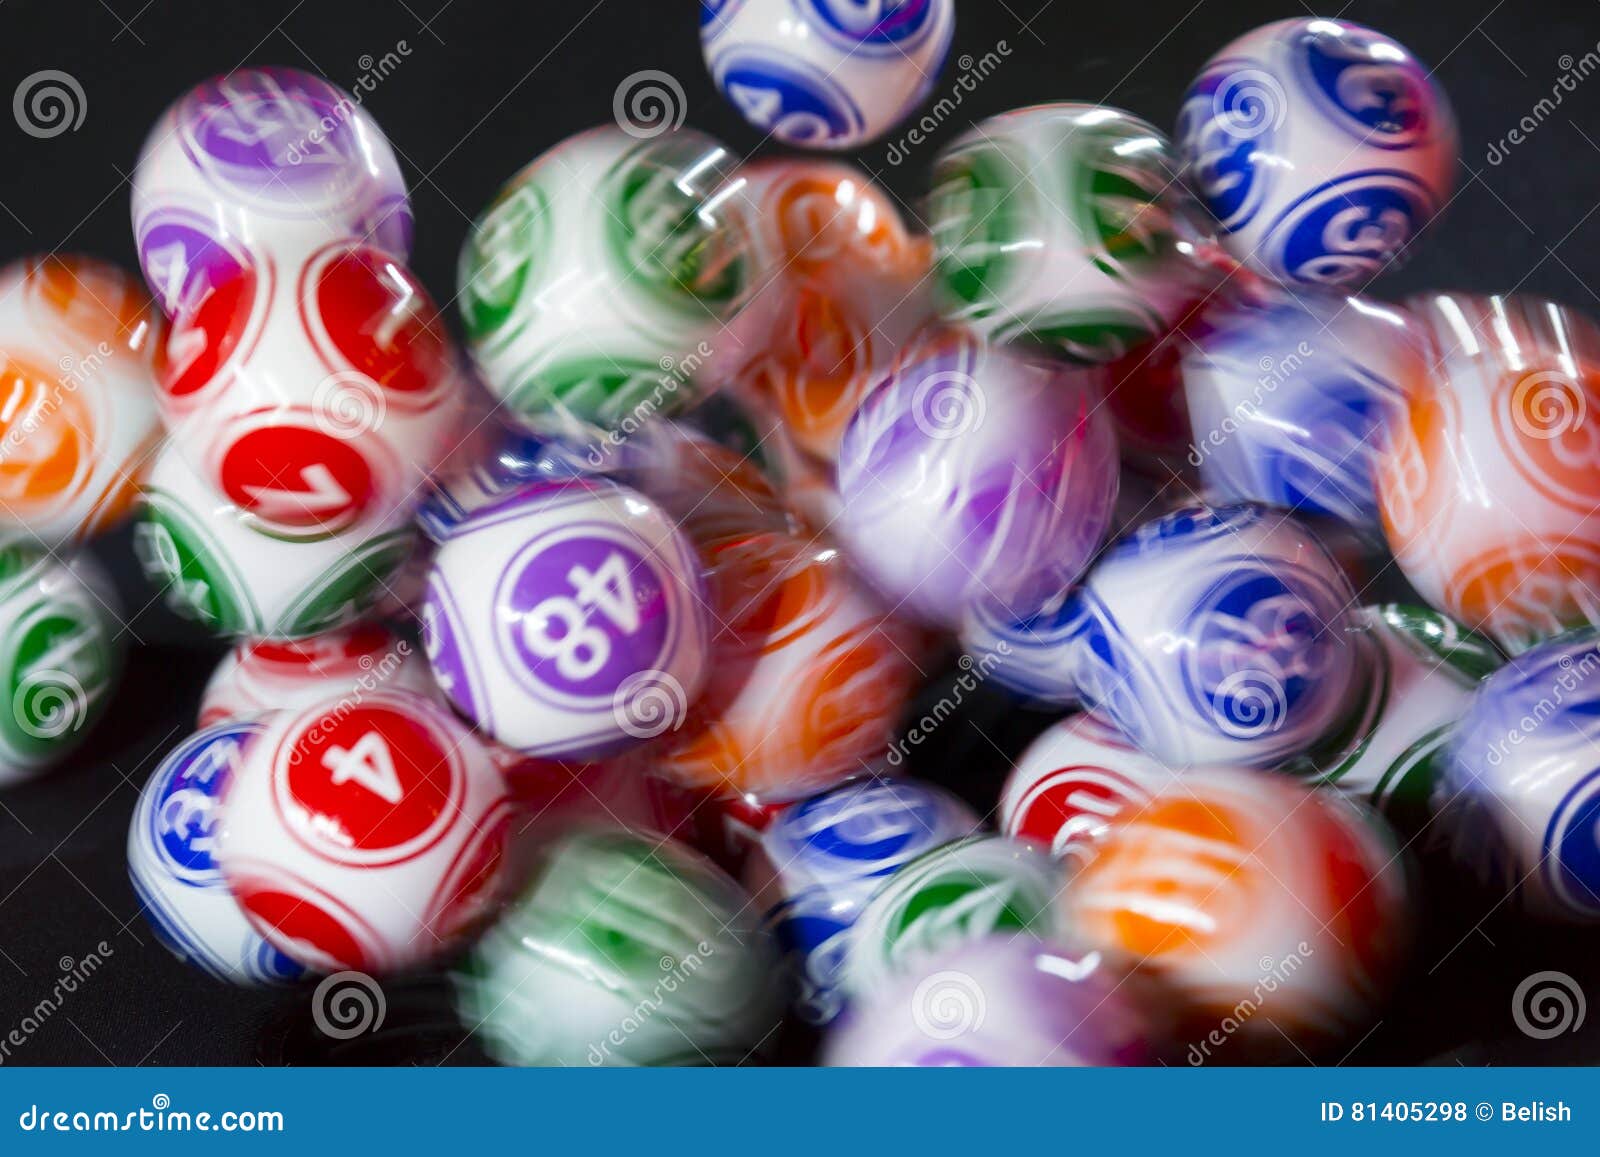 colourful lottery balls in a sphere